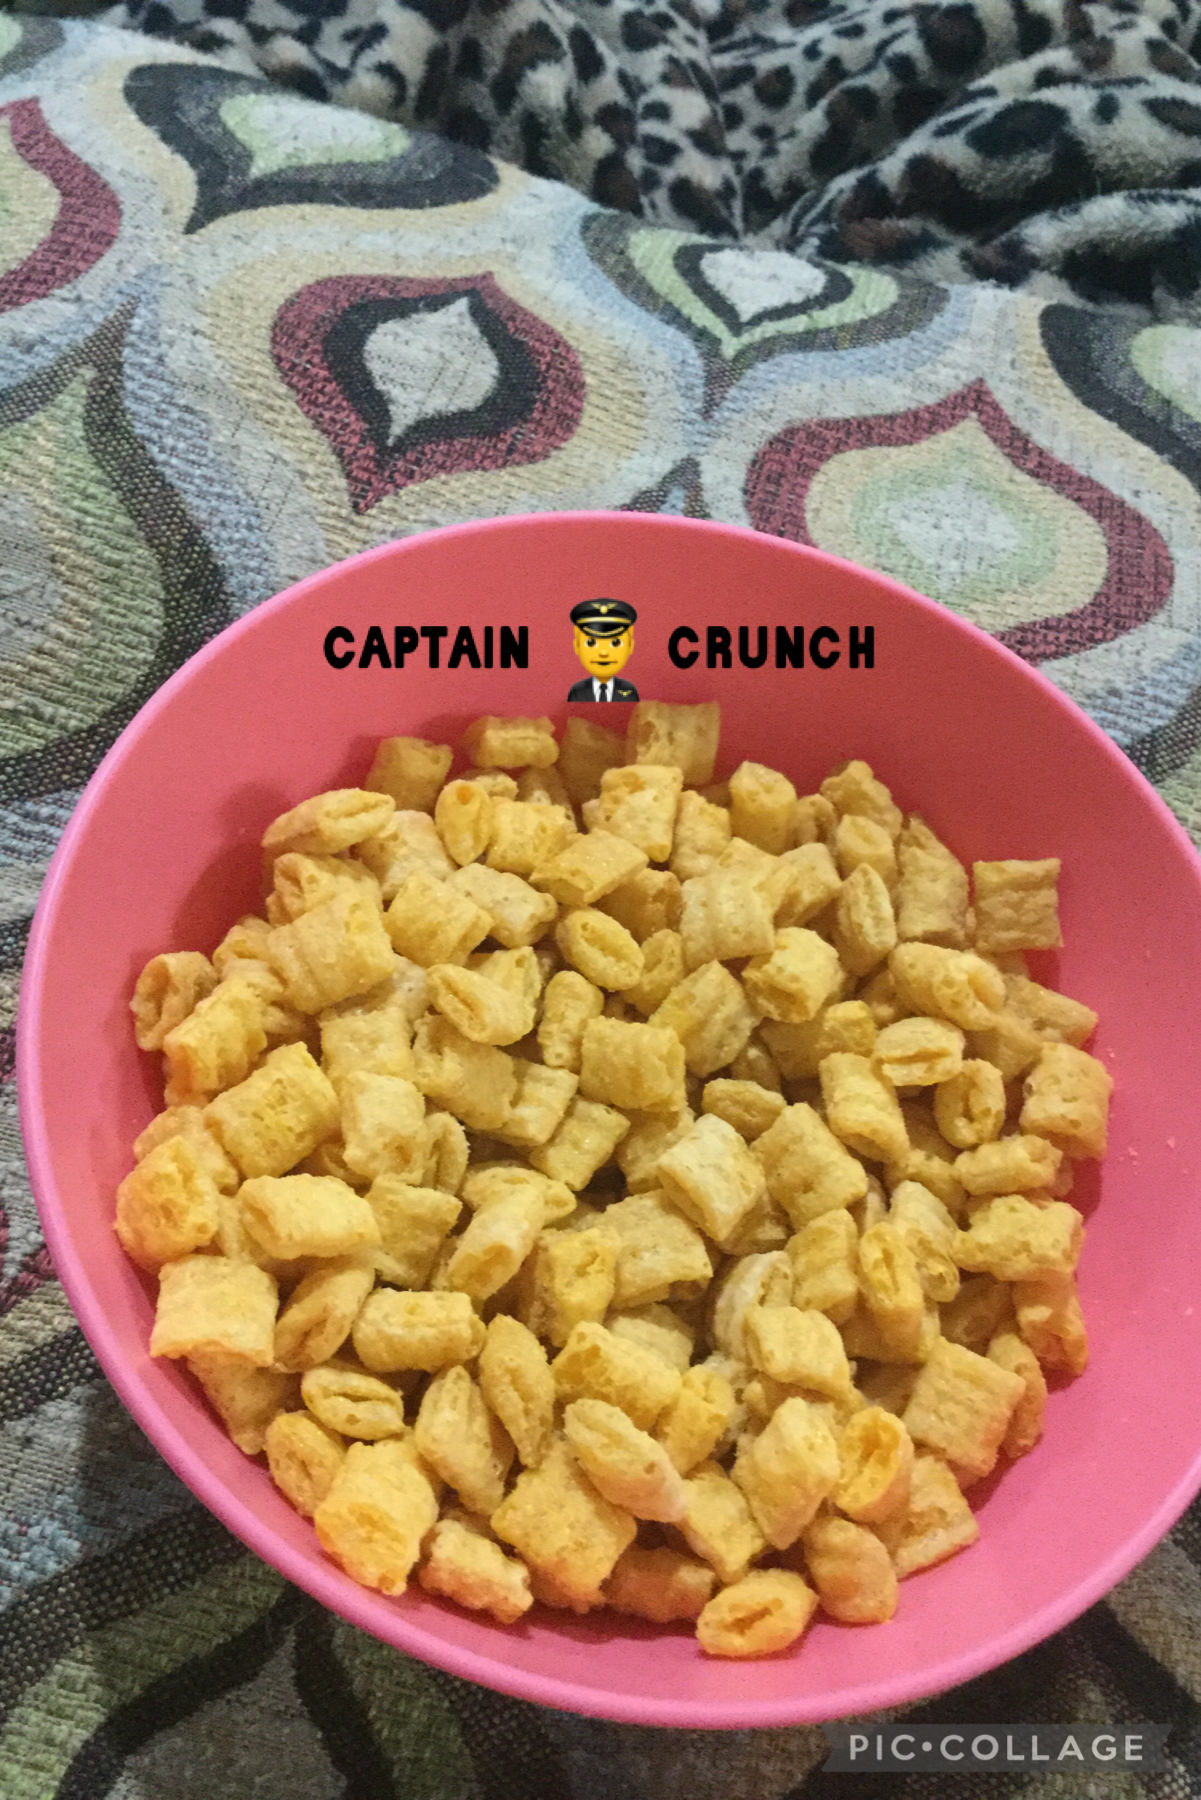 like this post if you have ever eaten cereal for dinner